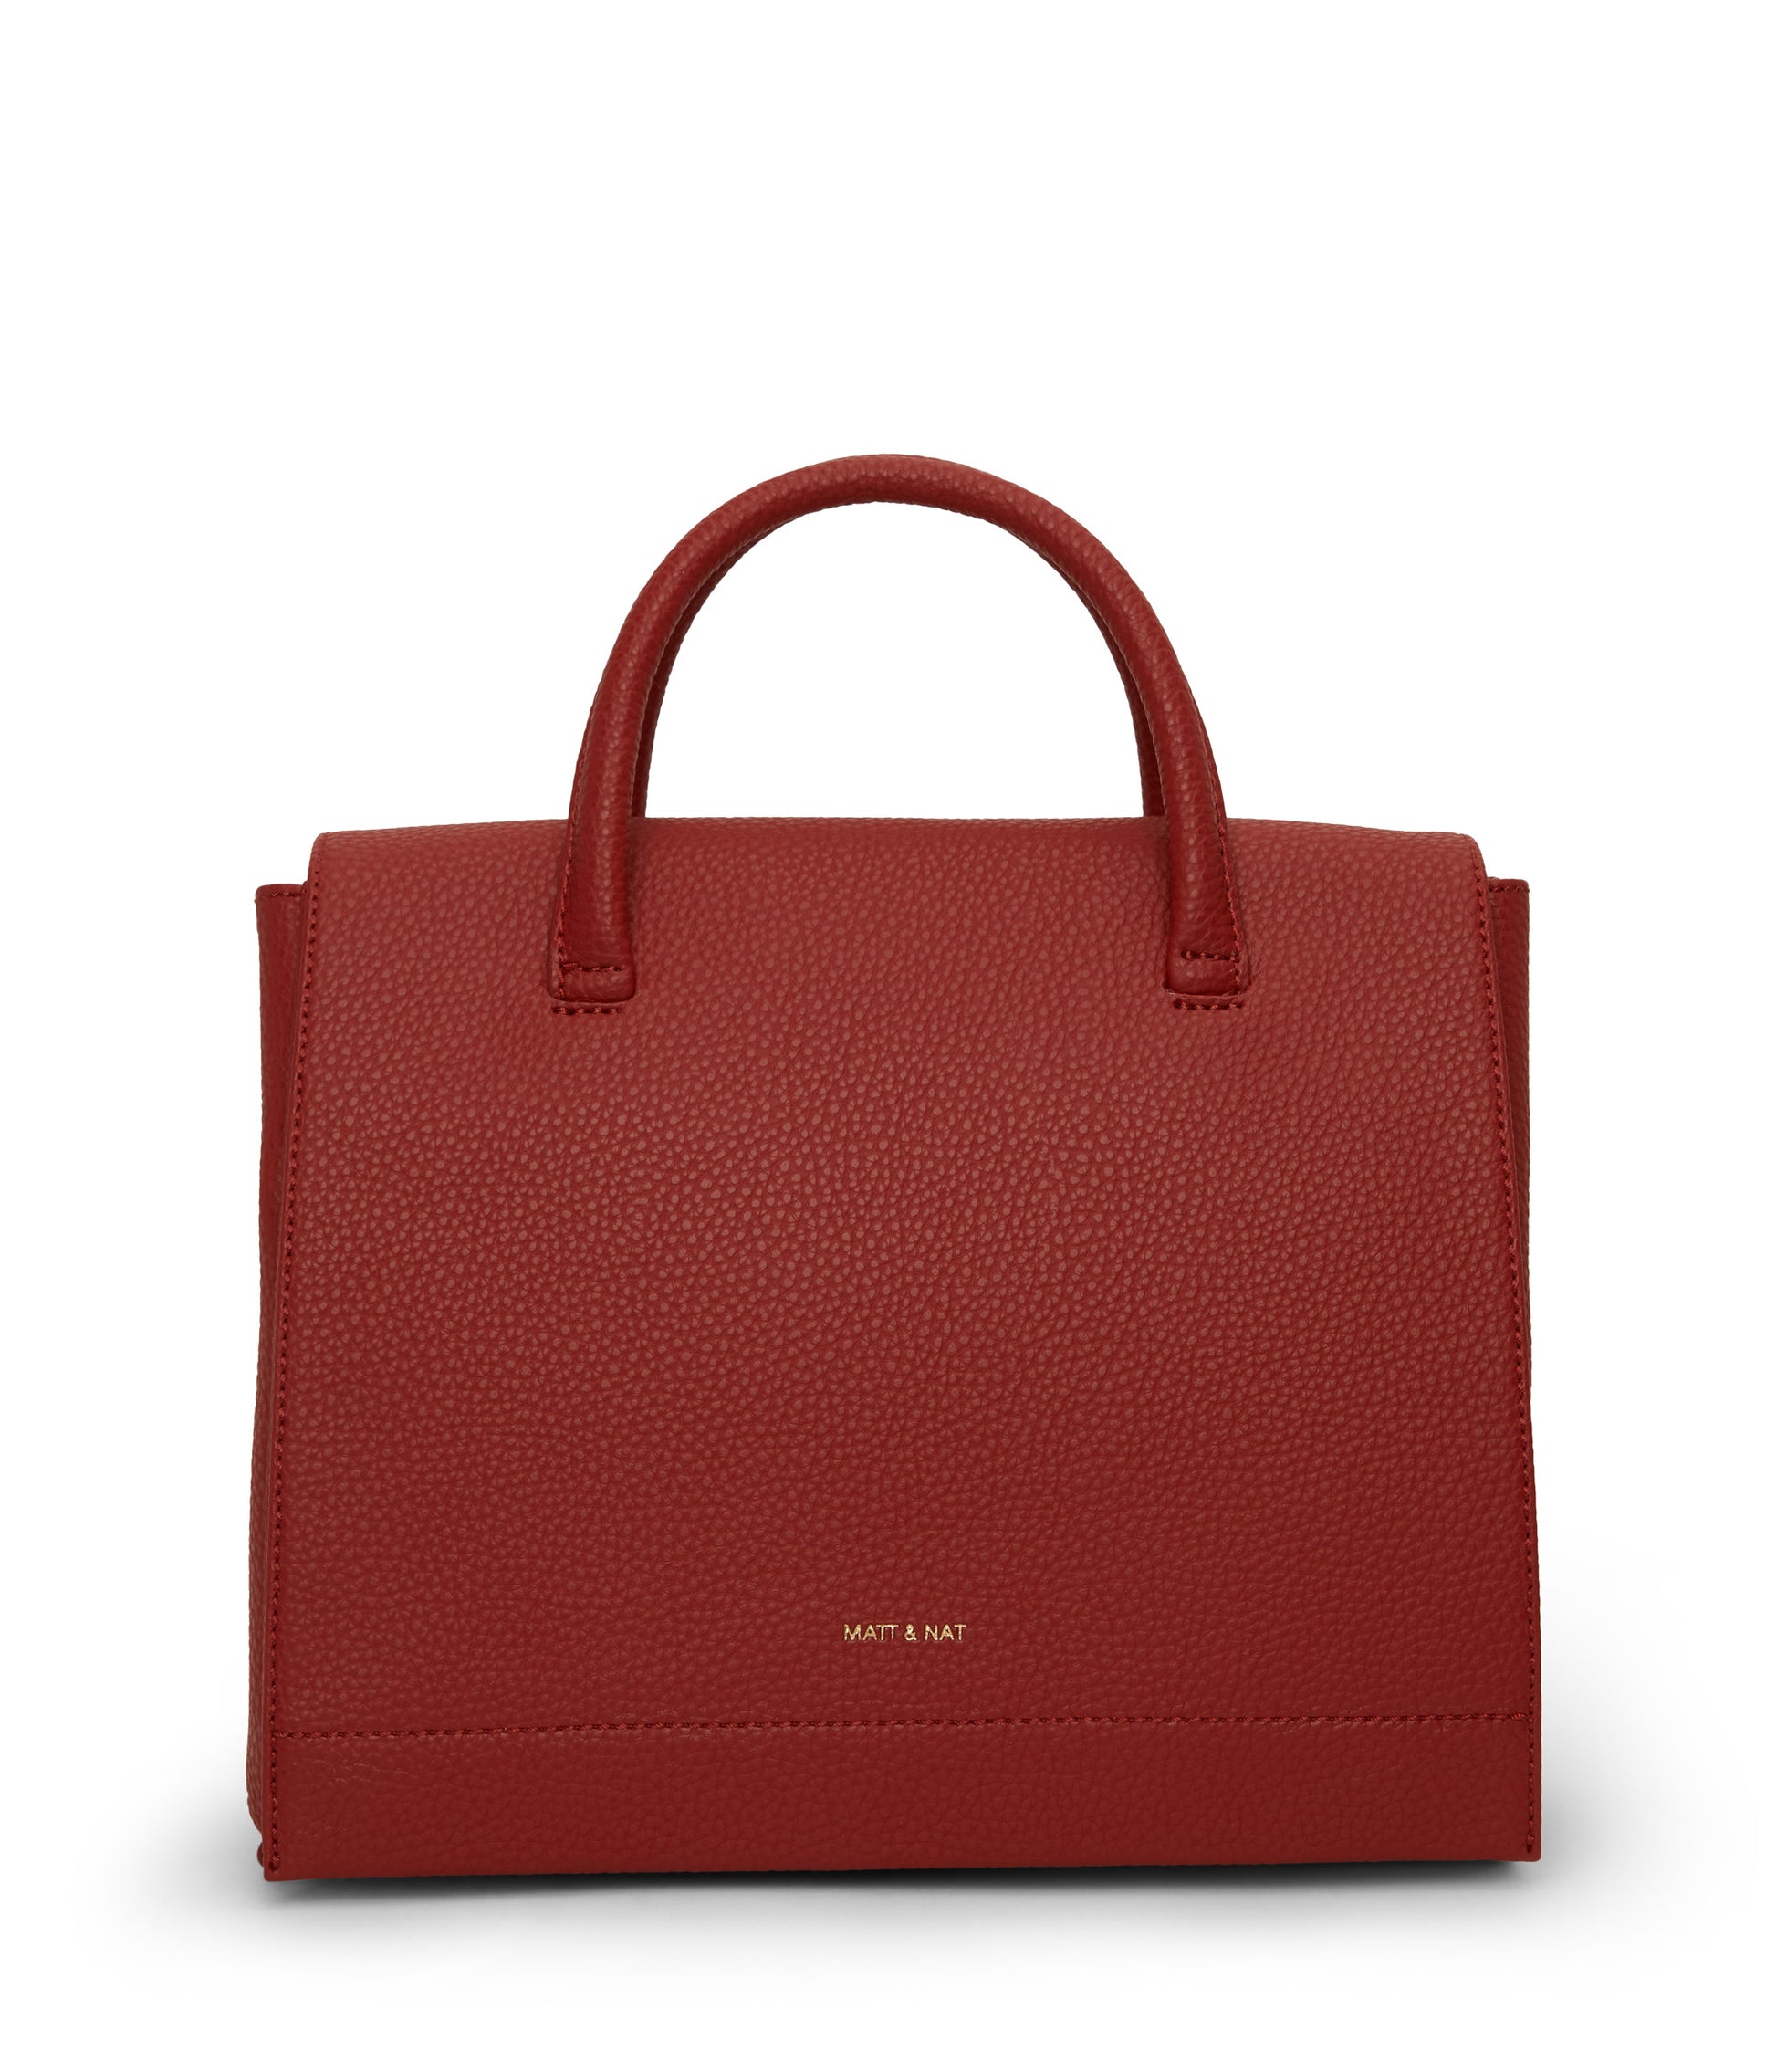 ADEL Vegan Satchel - Purity | Color: Red - variant::passion